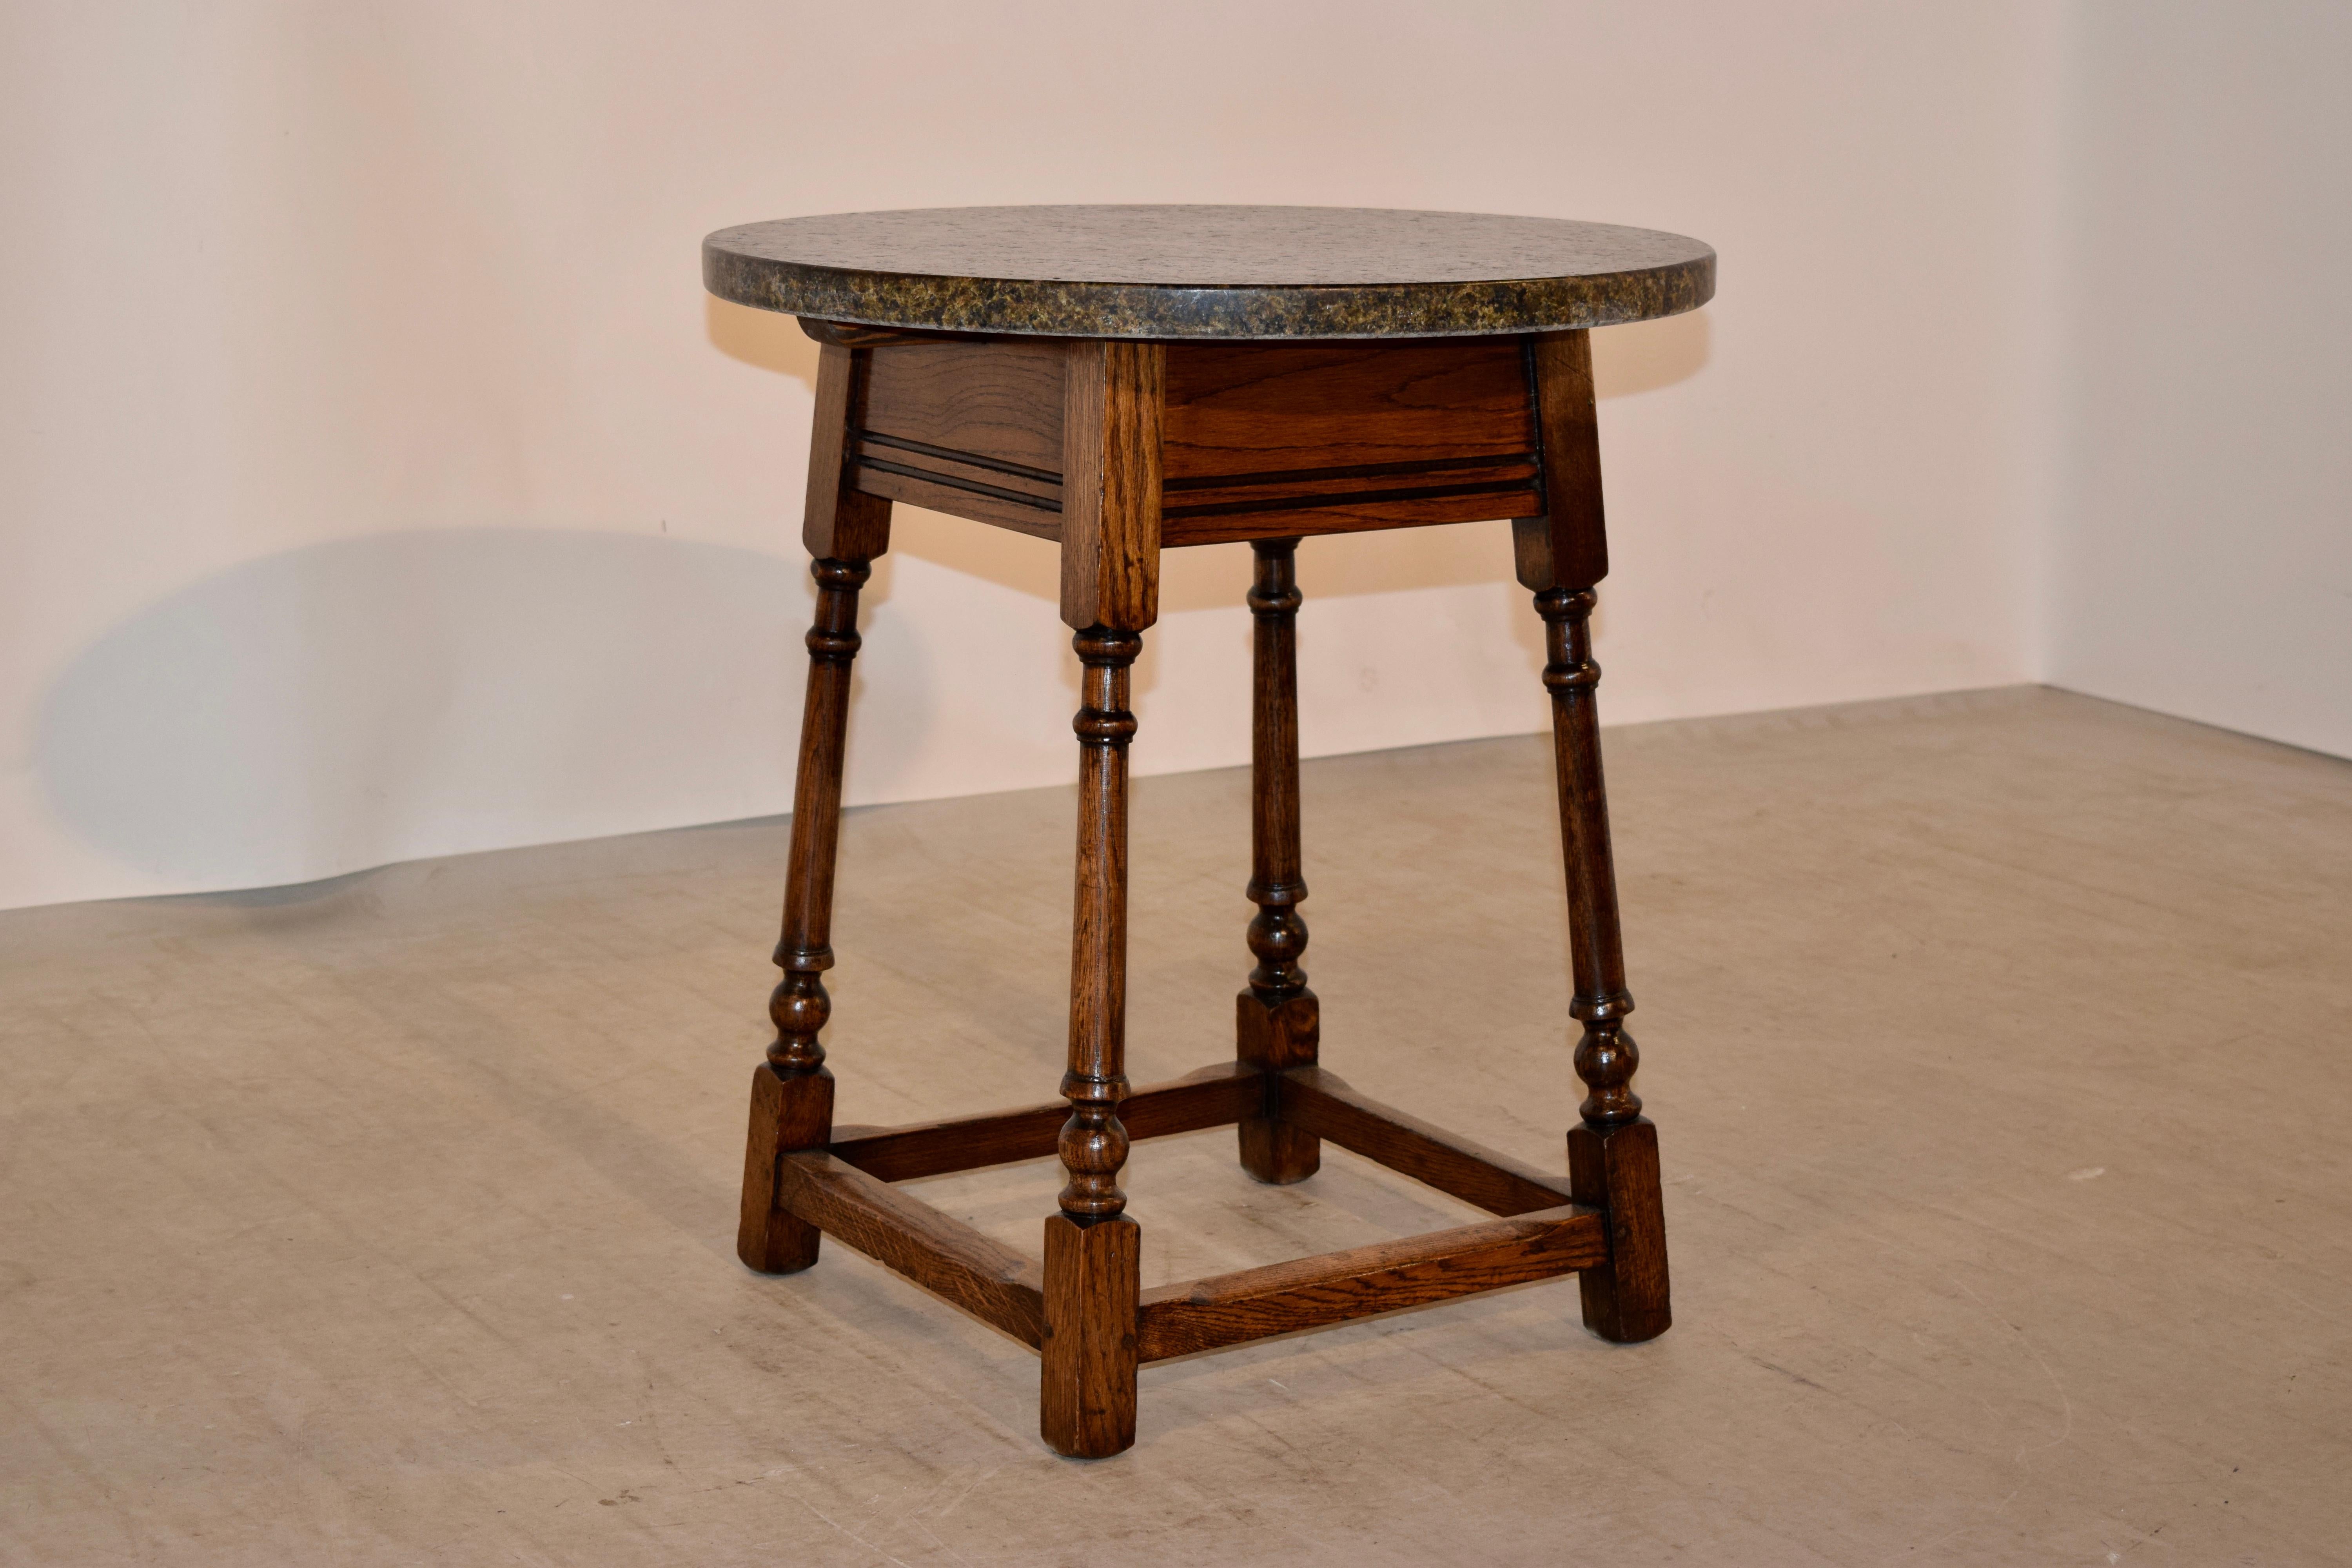 English oak side table with a marble top, circa 1900. The marble has a leathered appearance and is rich in color and depth. The base is hand-turned and has splayed legs joined by simple stretchers.